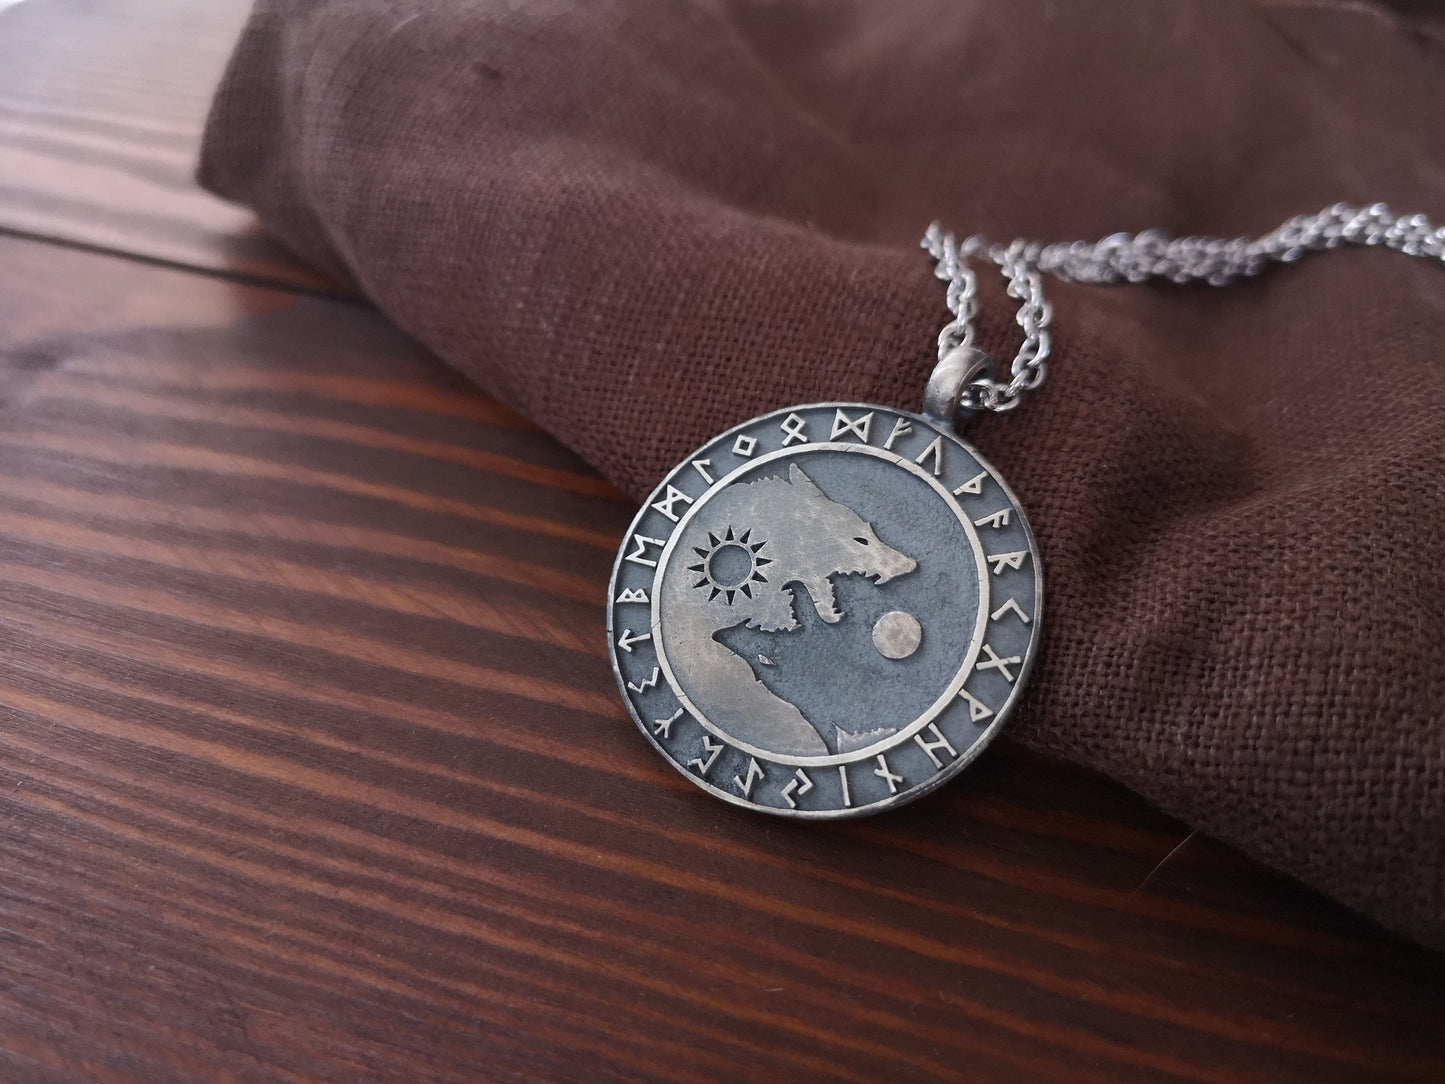 Celtic and Viking inspired Necklace with Wolves Skoll Hati Chasing Sun and Moon - Balance In Life, Friendship Best Friend Pendant